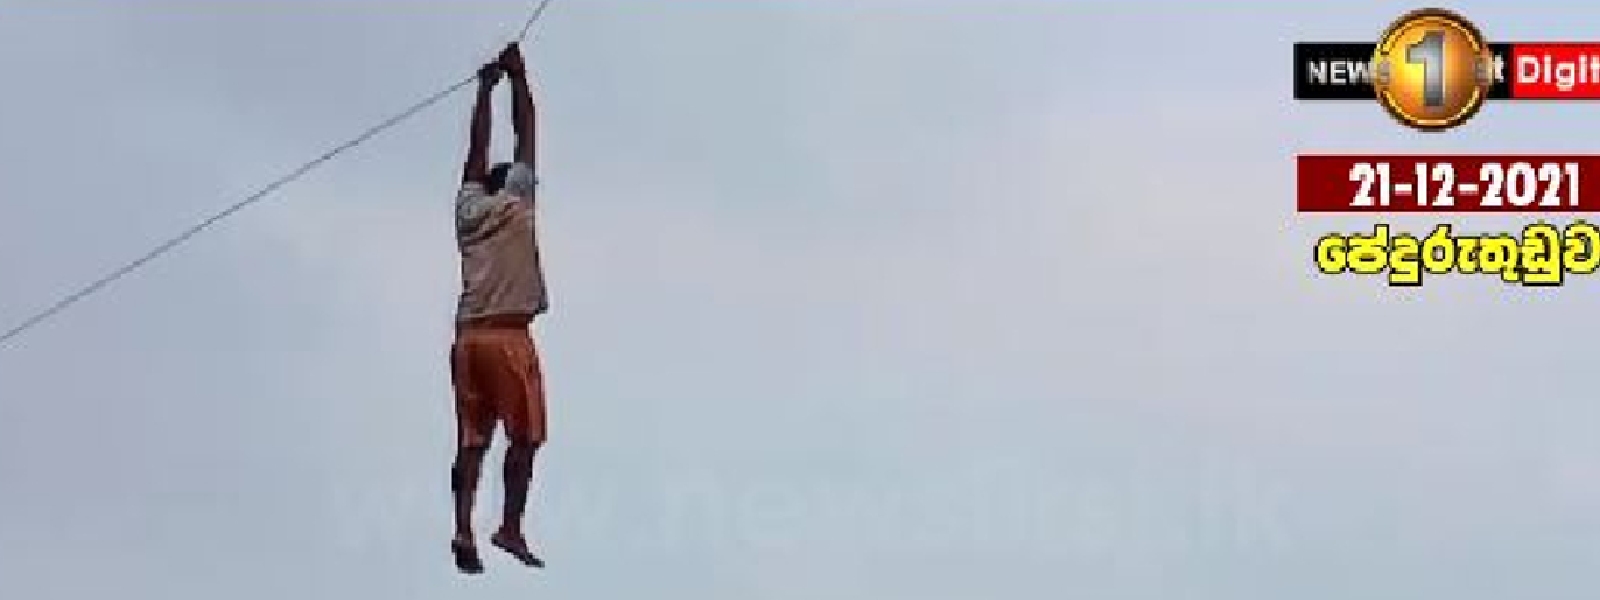 Young man hangs for dear life, as kite tries to take him away